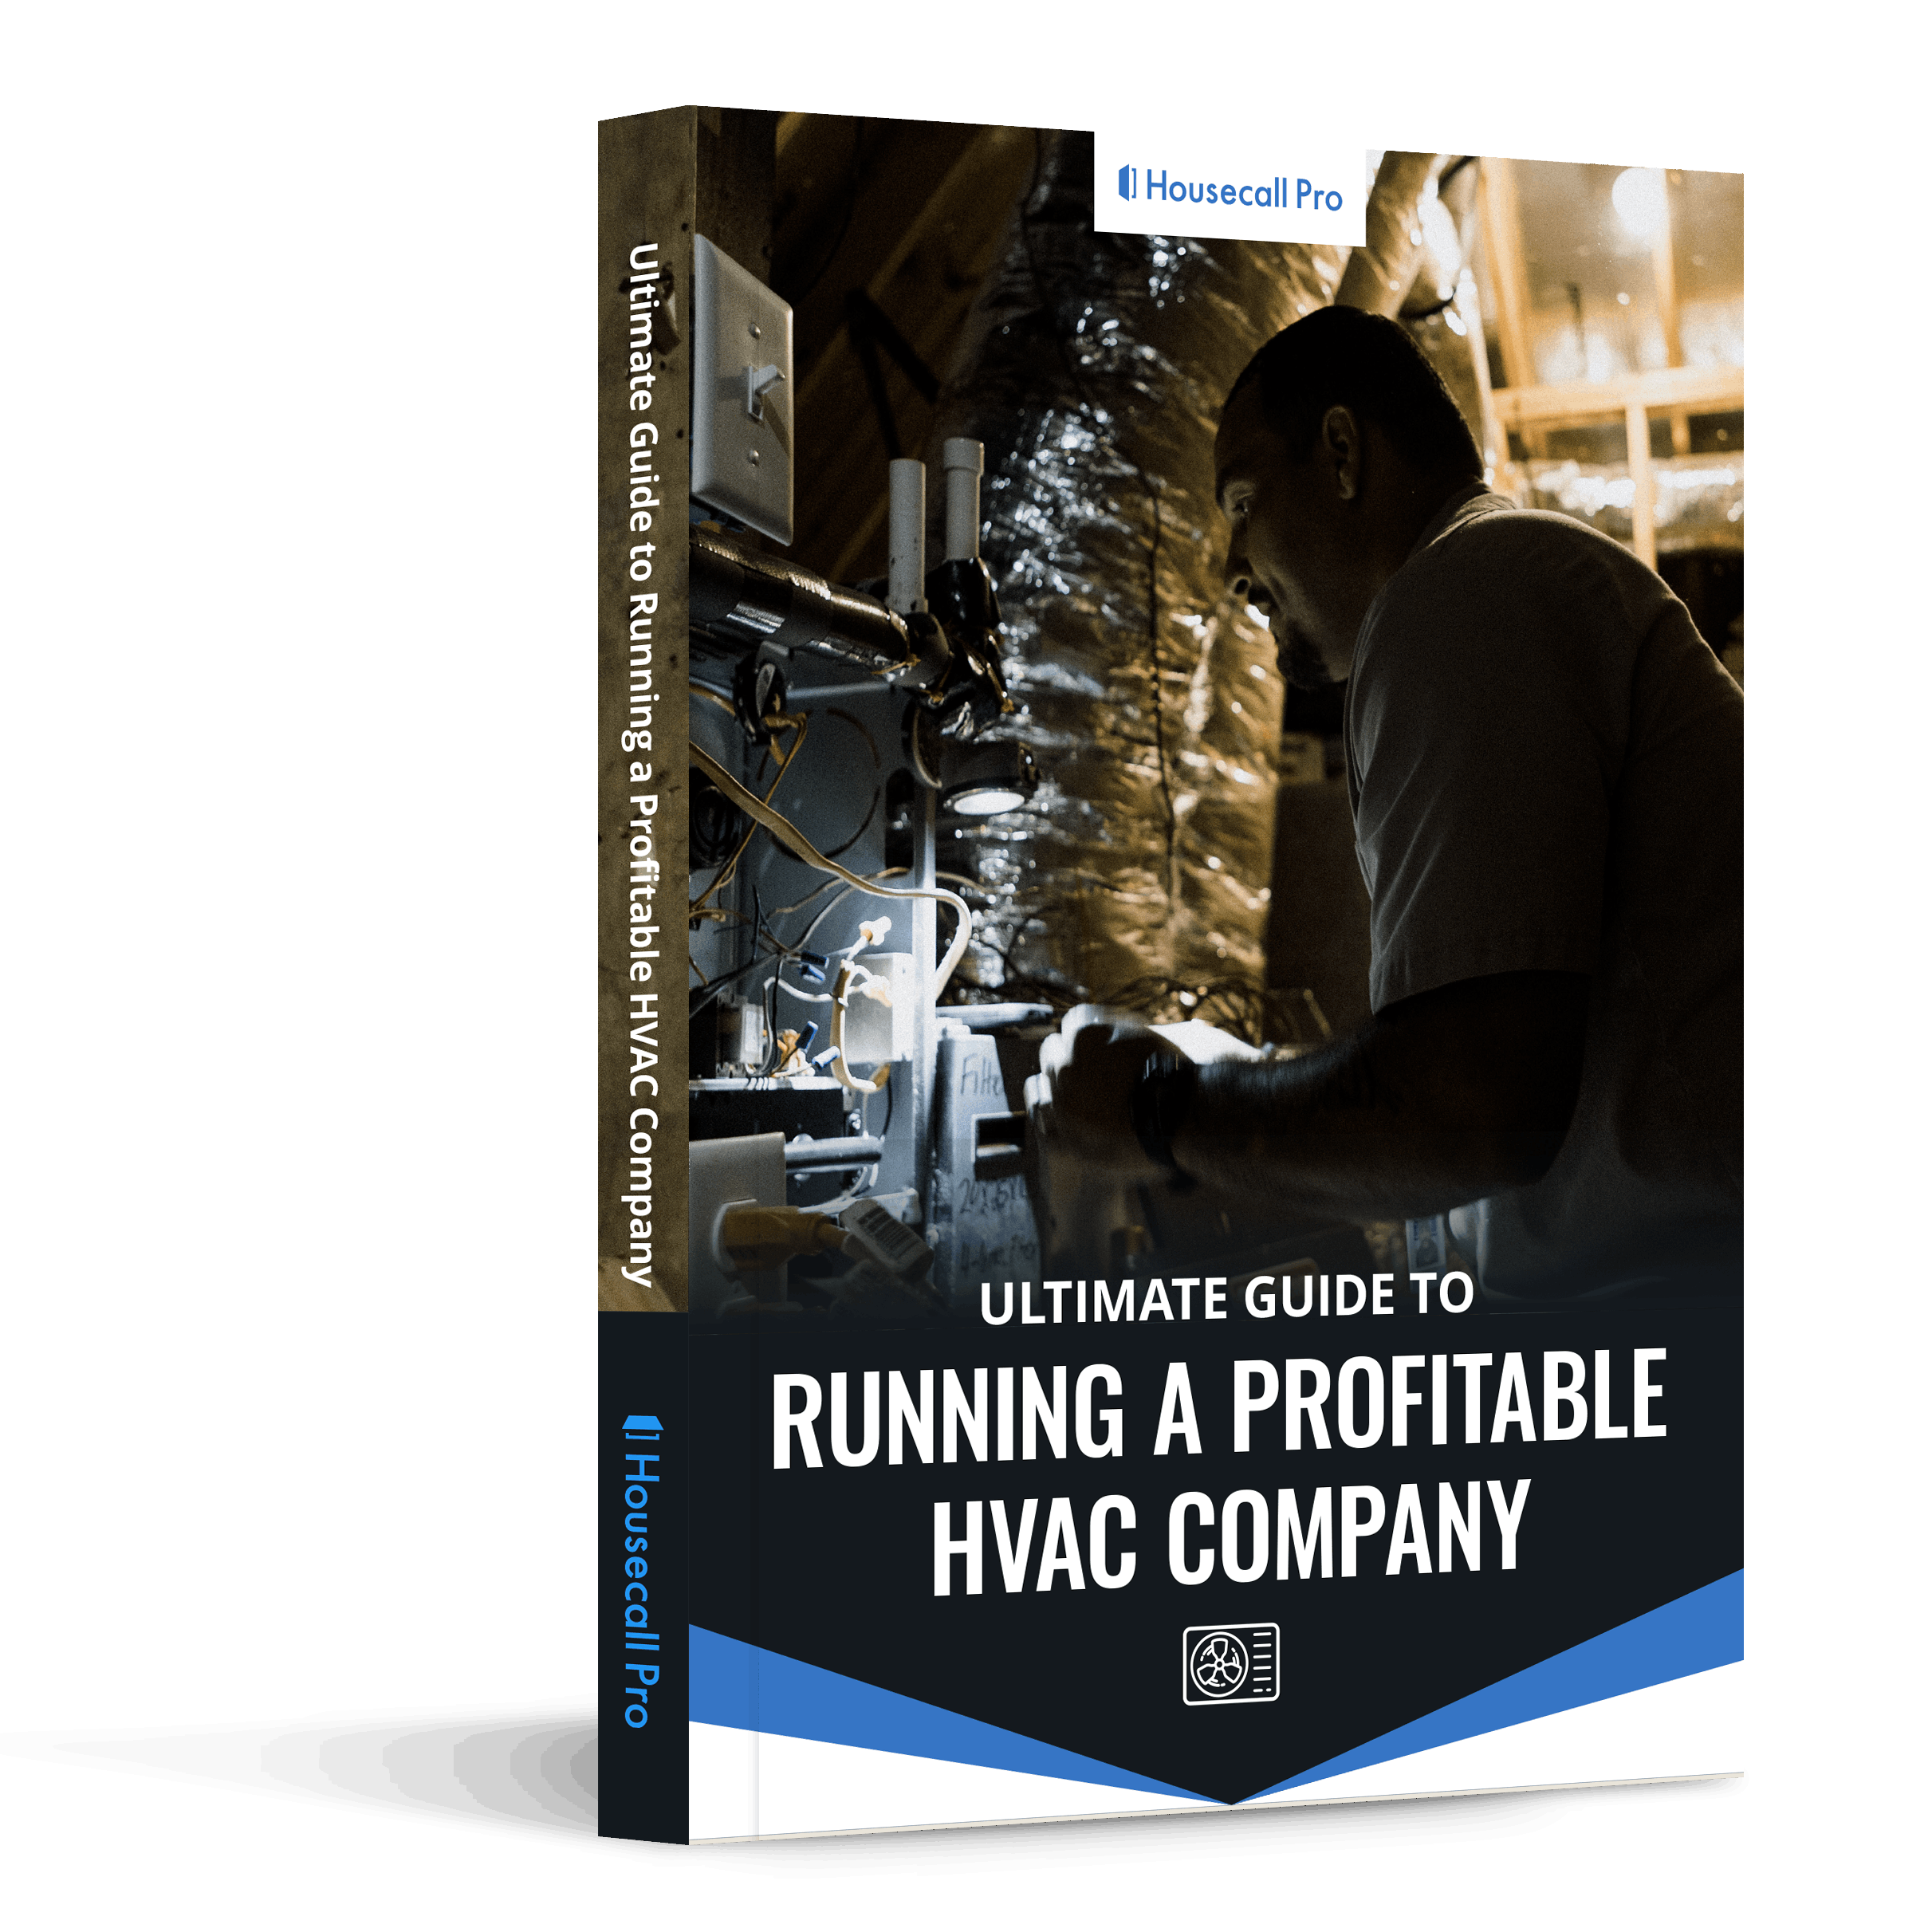 The Ultimate Guide to Running a Profitable HVAC Company